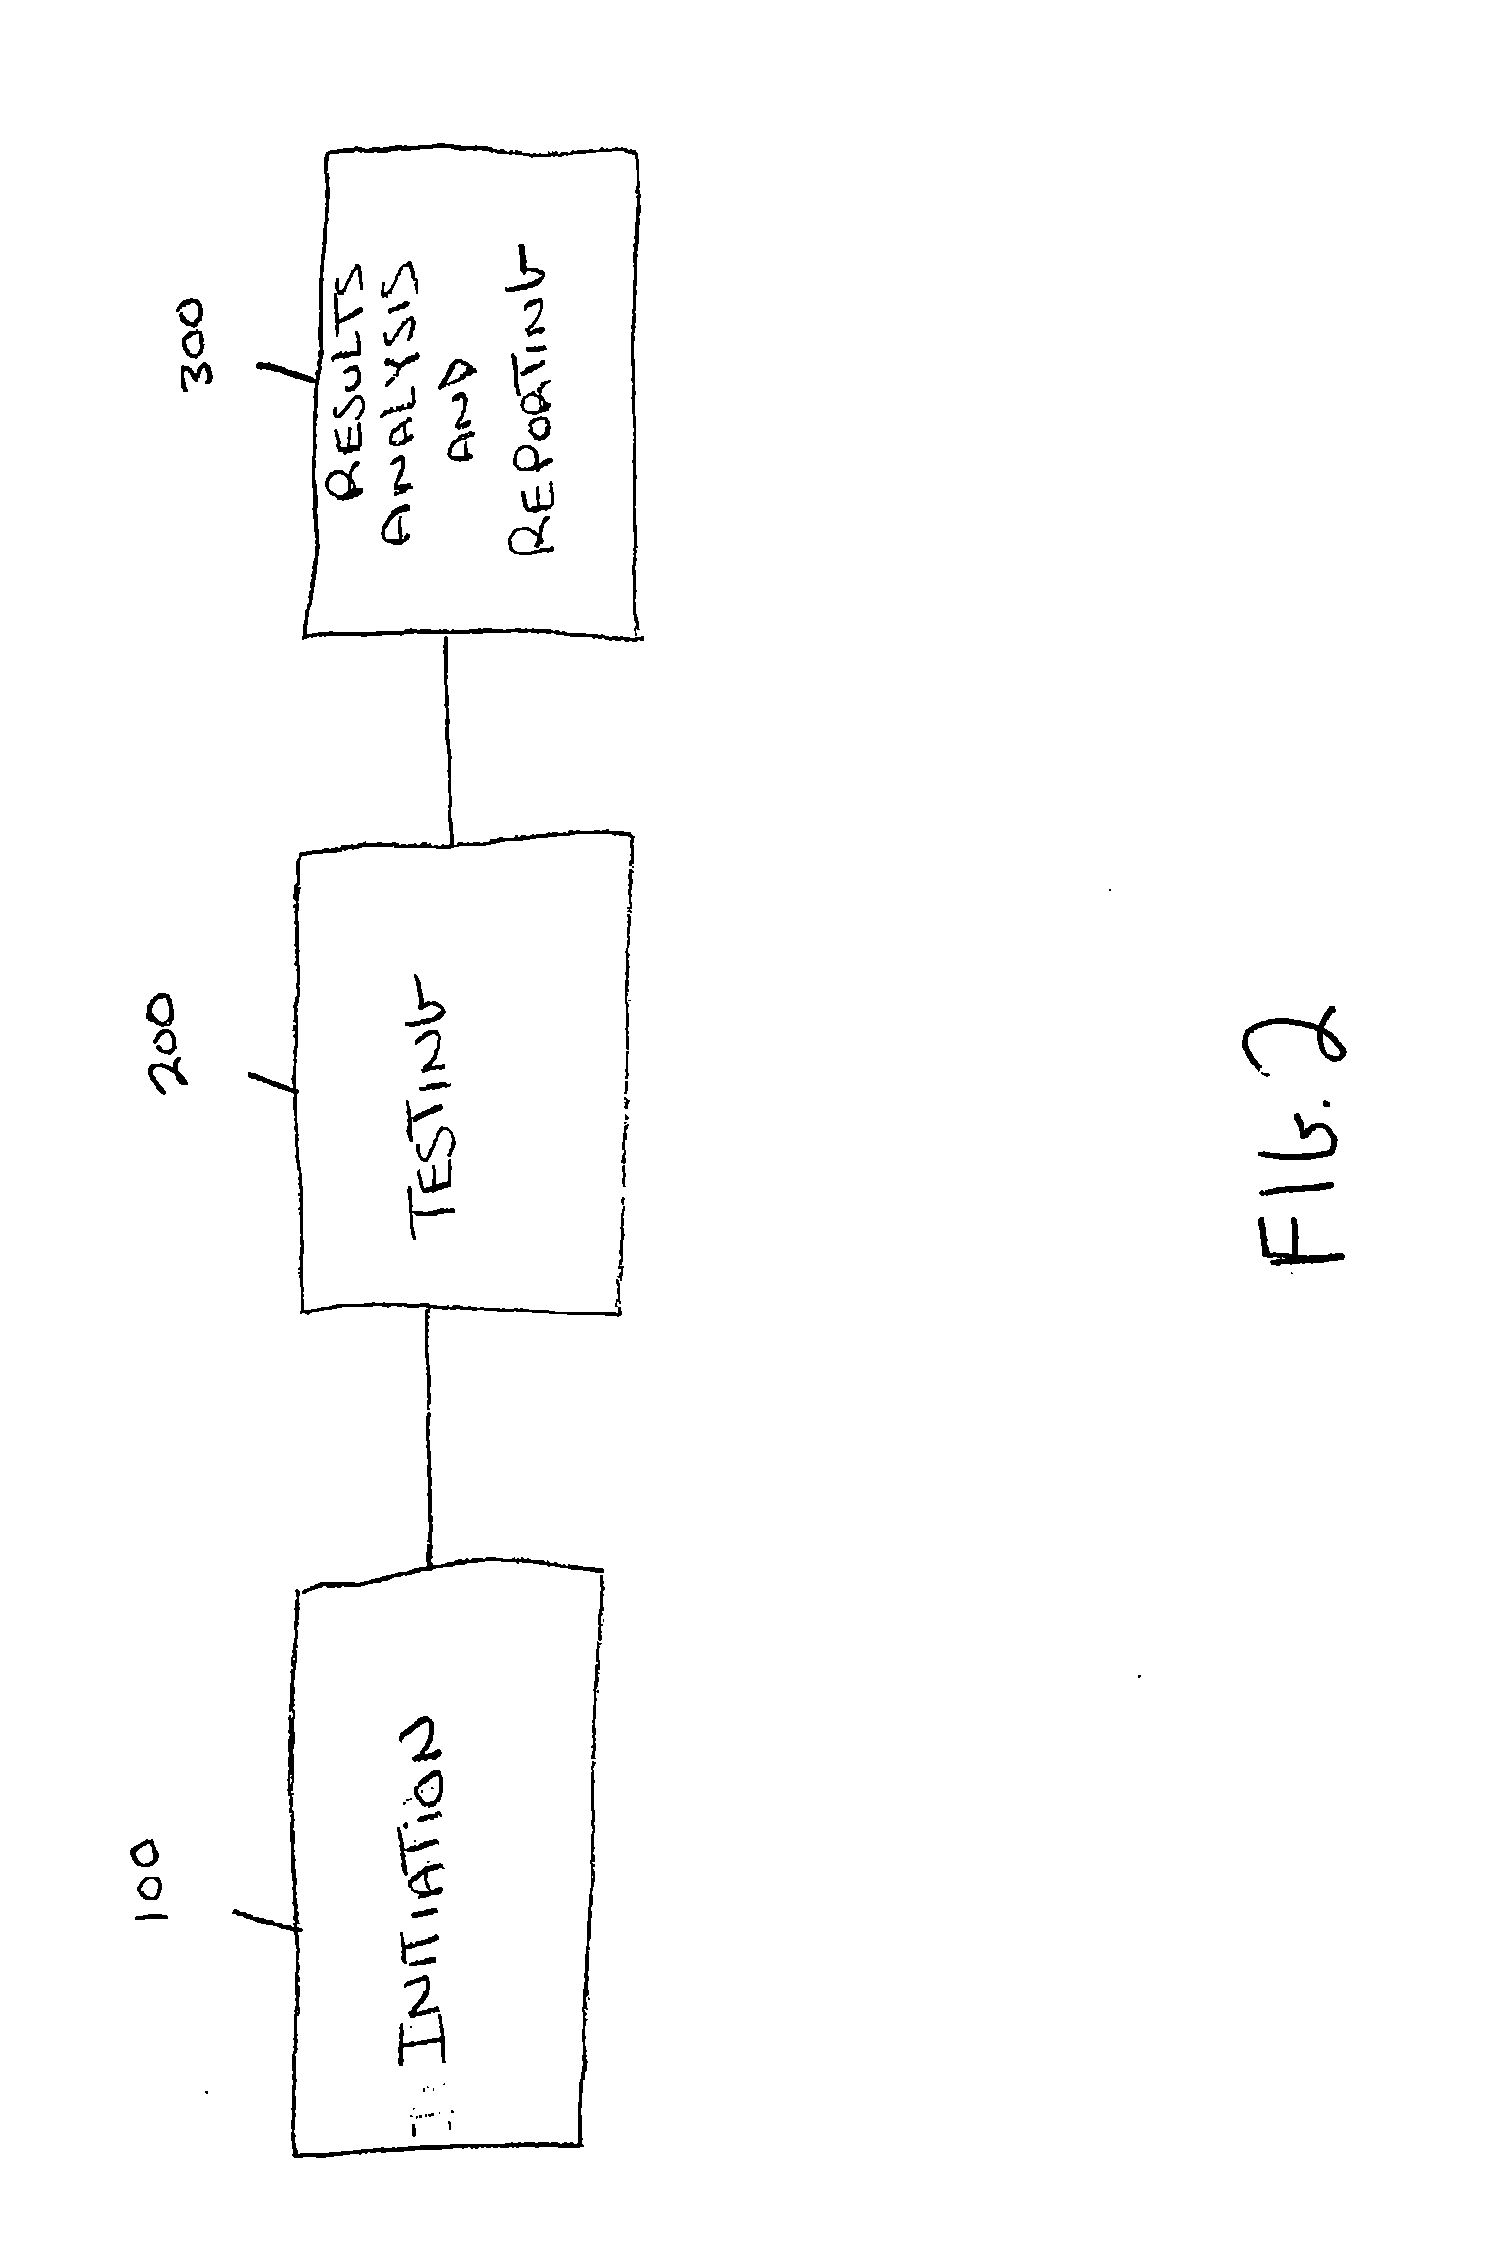 Medical screening system and method